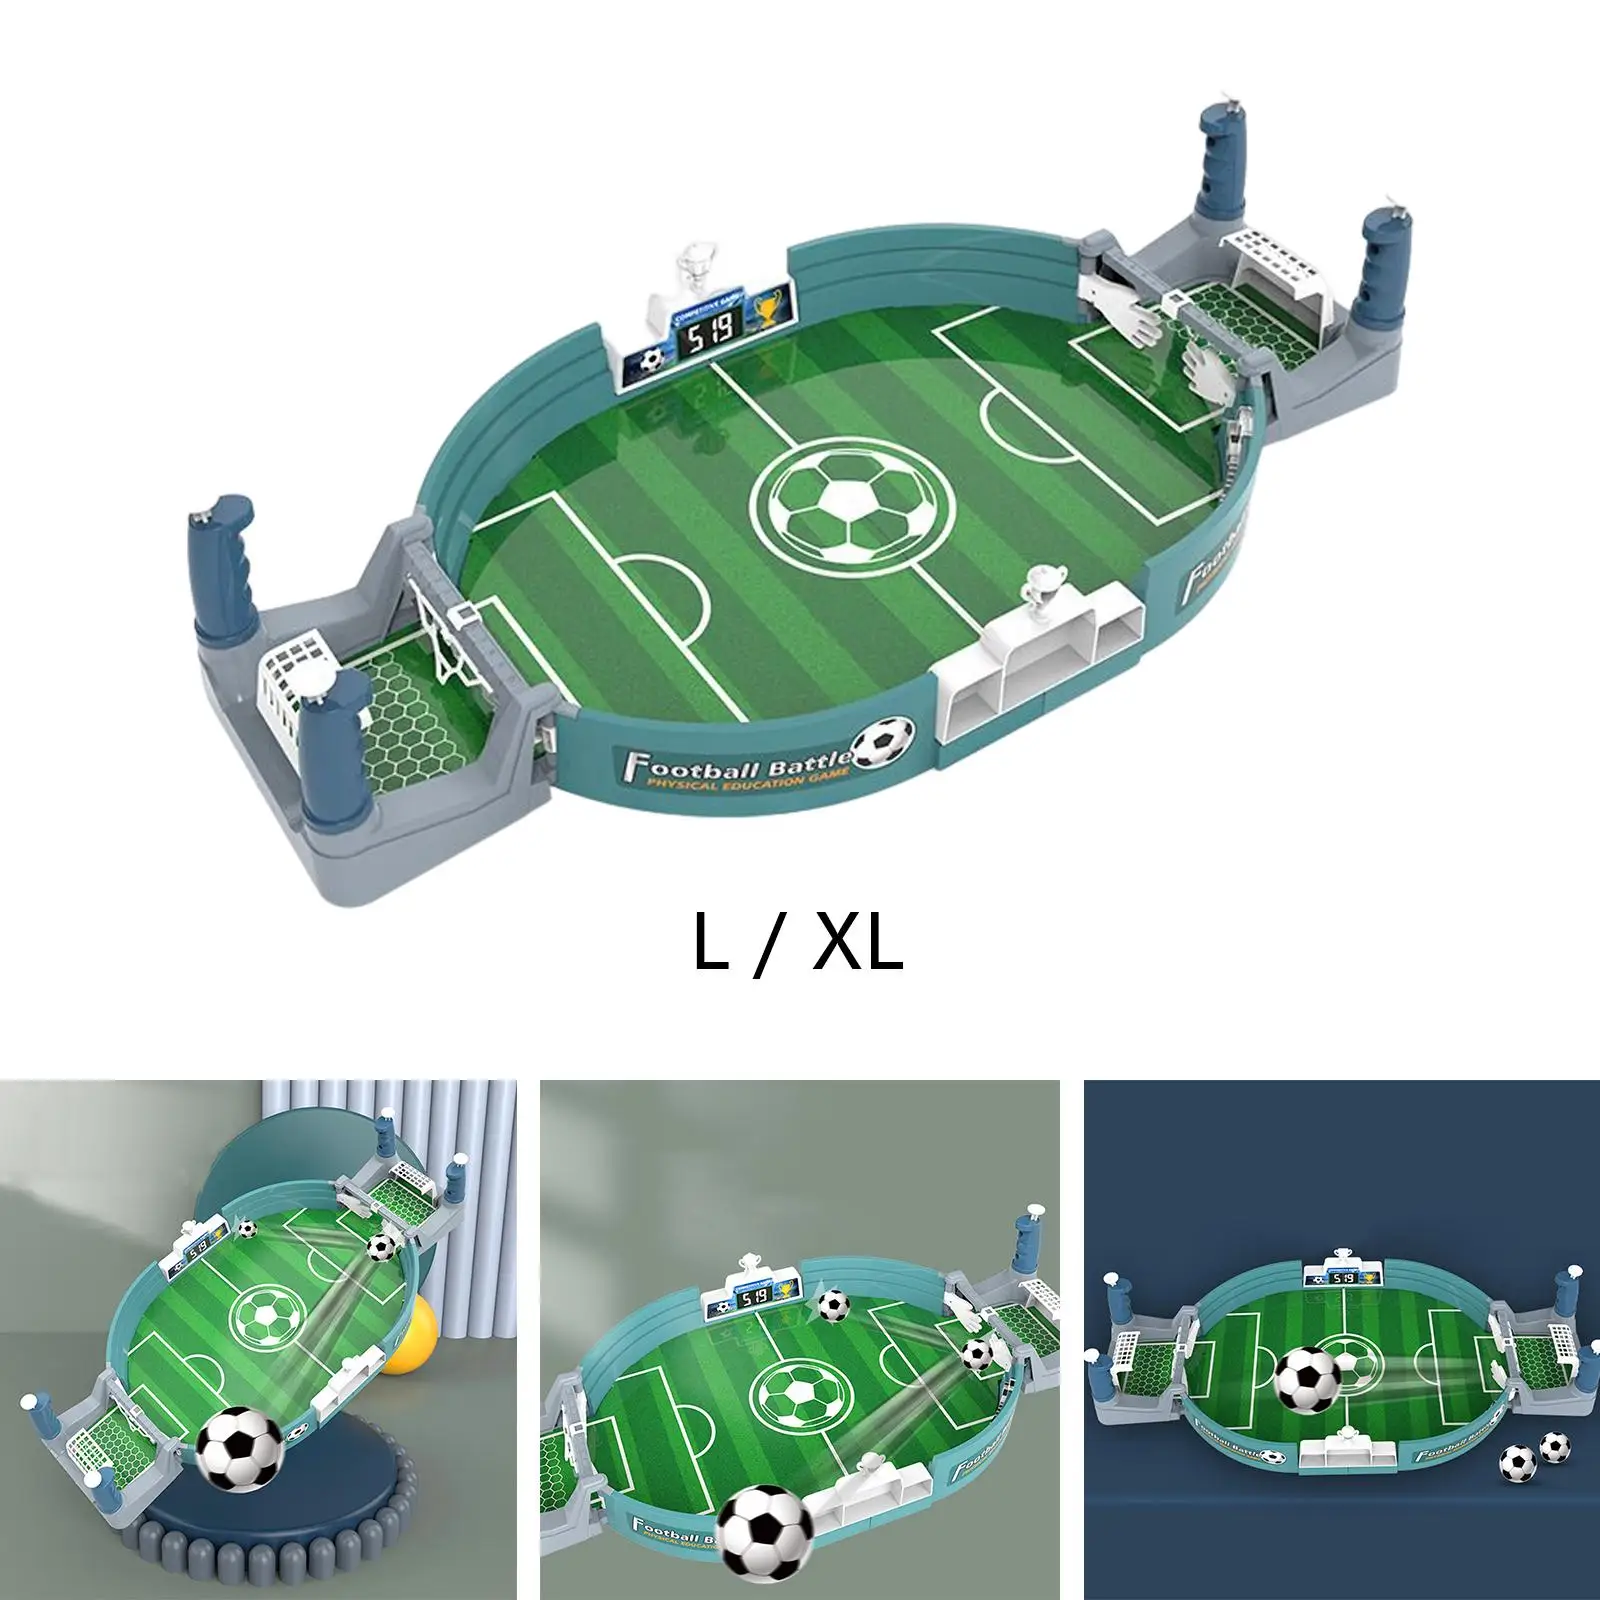 Table Board Interactive Toys Mini Tabletop Football Soccer Pinball Games Funny Football Game for Adults Kids Boys